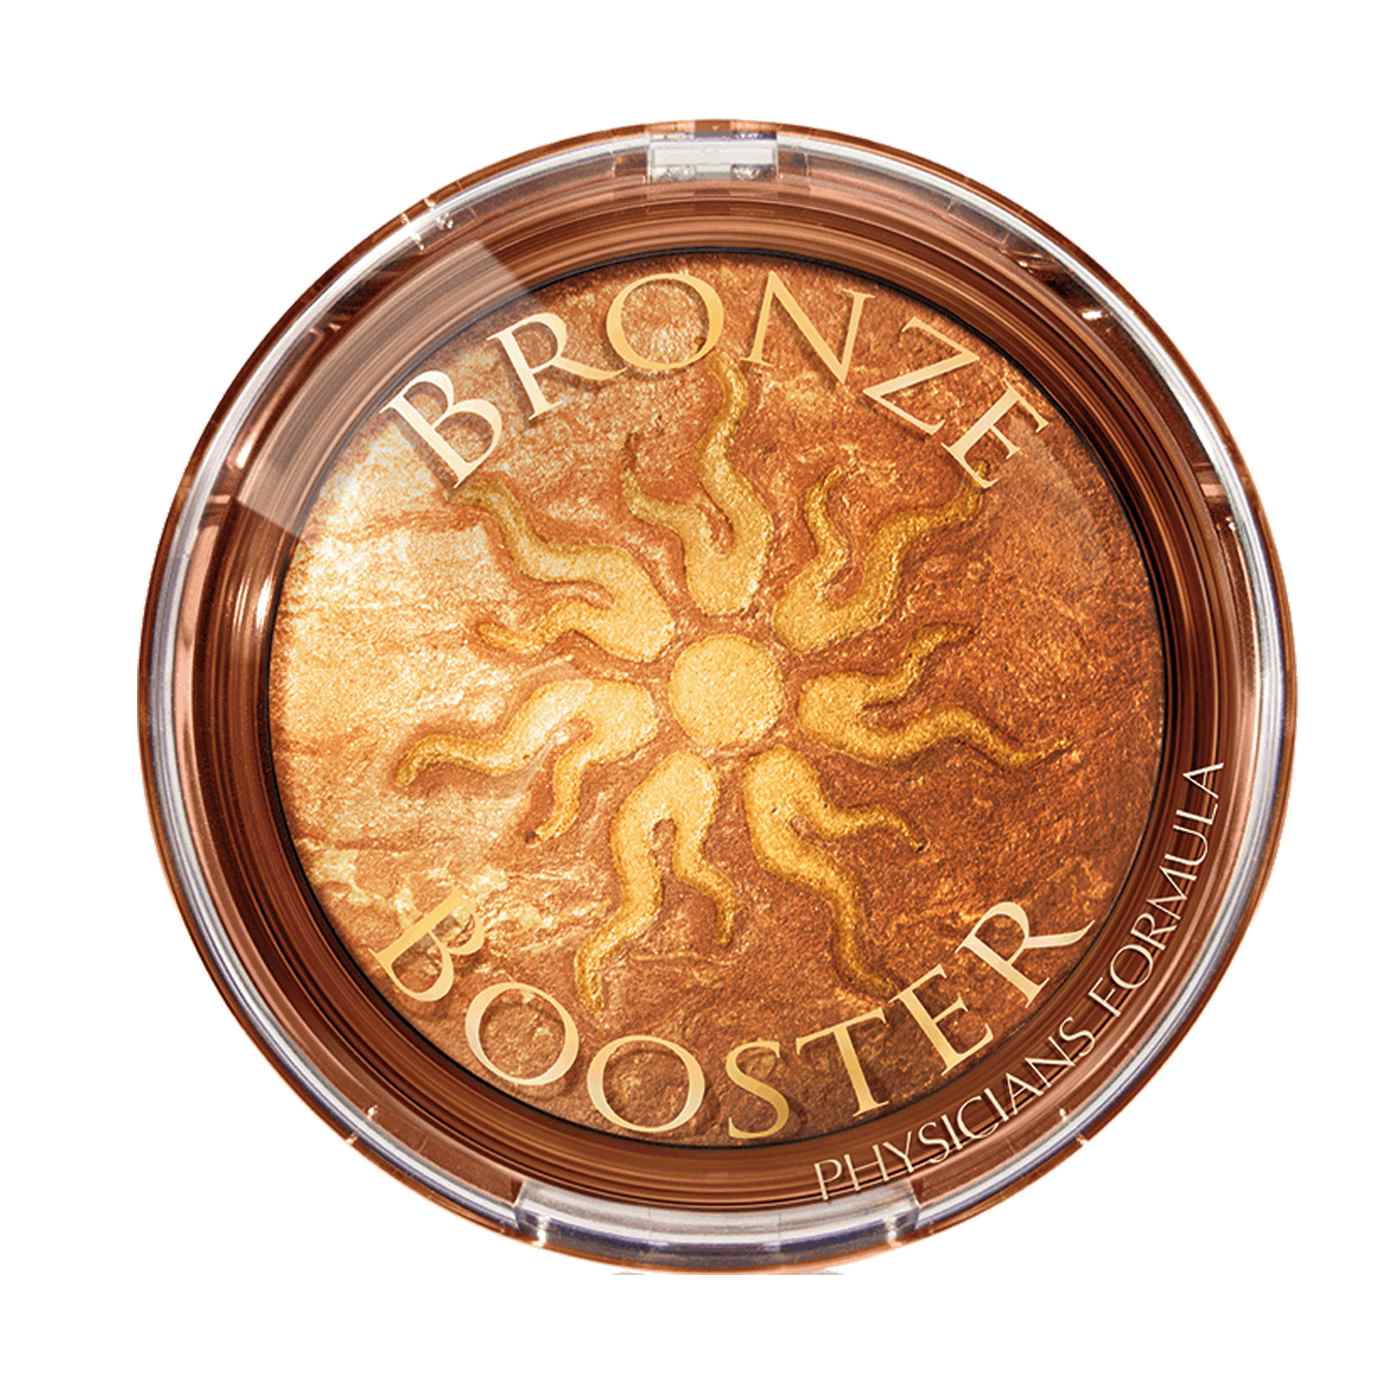 Physicians Formula Bronze Booster Glow-Boosting Baked Bronzer, Light to Medium; image 2 of 2